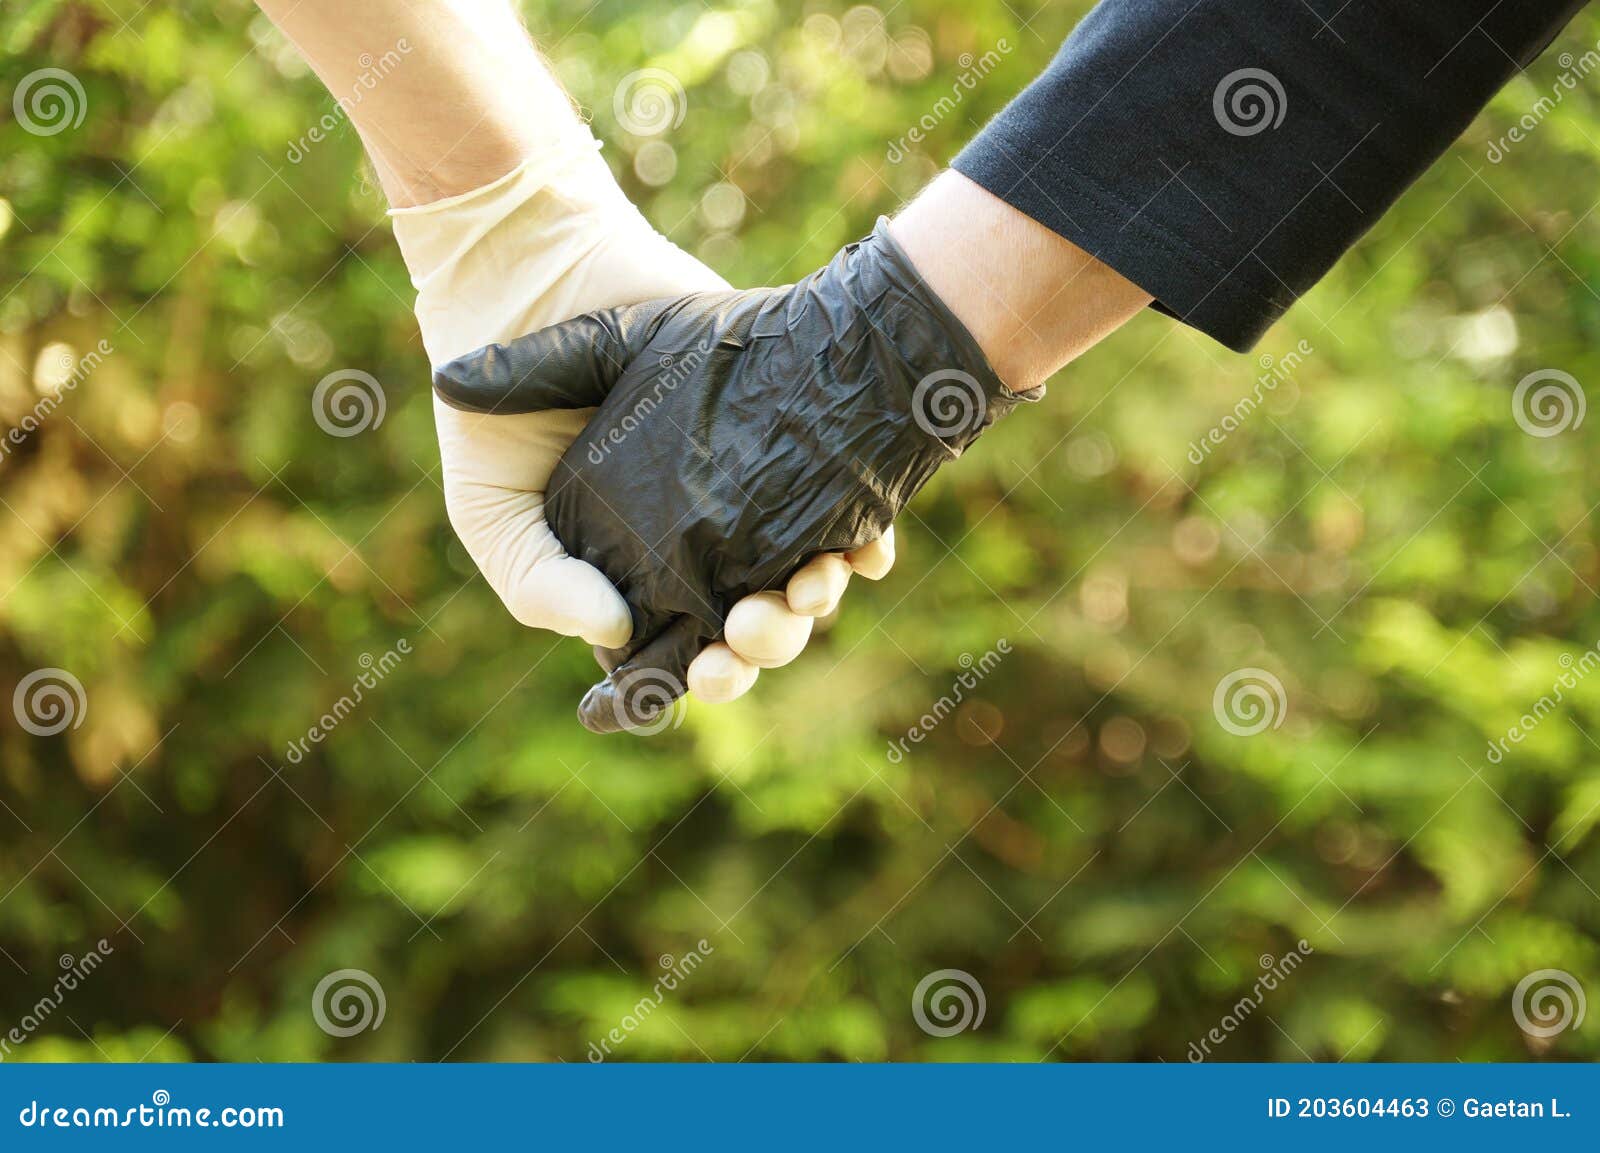 Couple Holding Hands with Gloves - of epidemic, black: